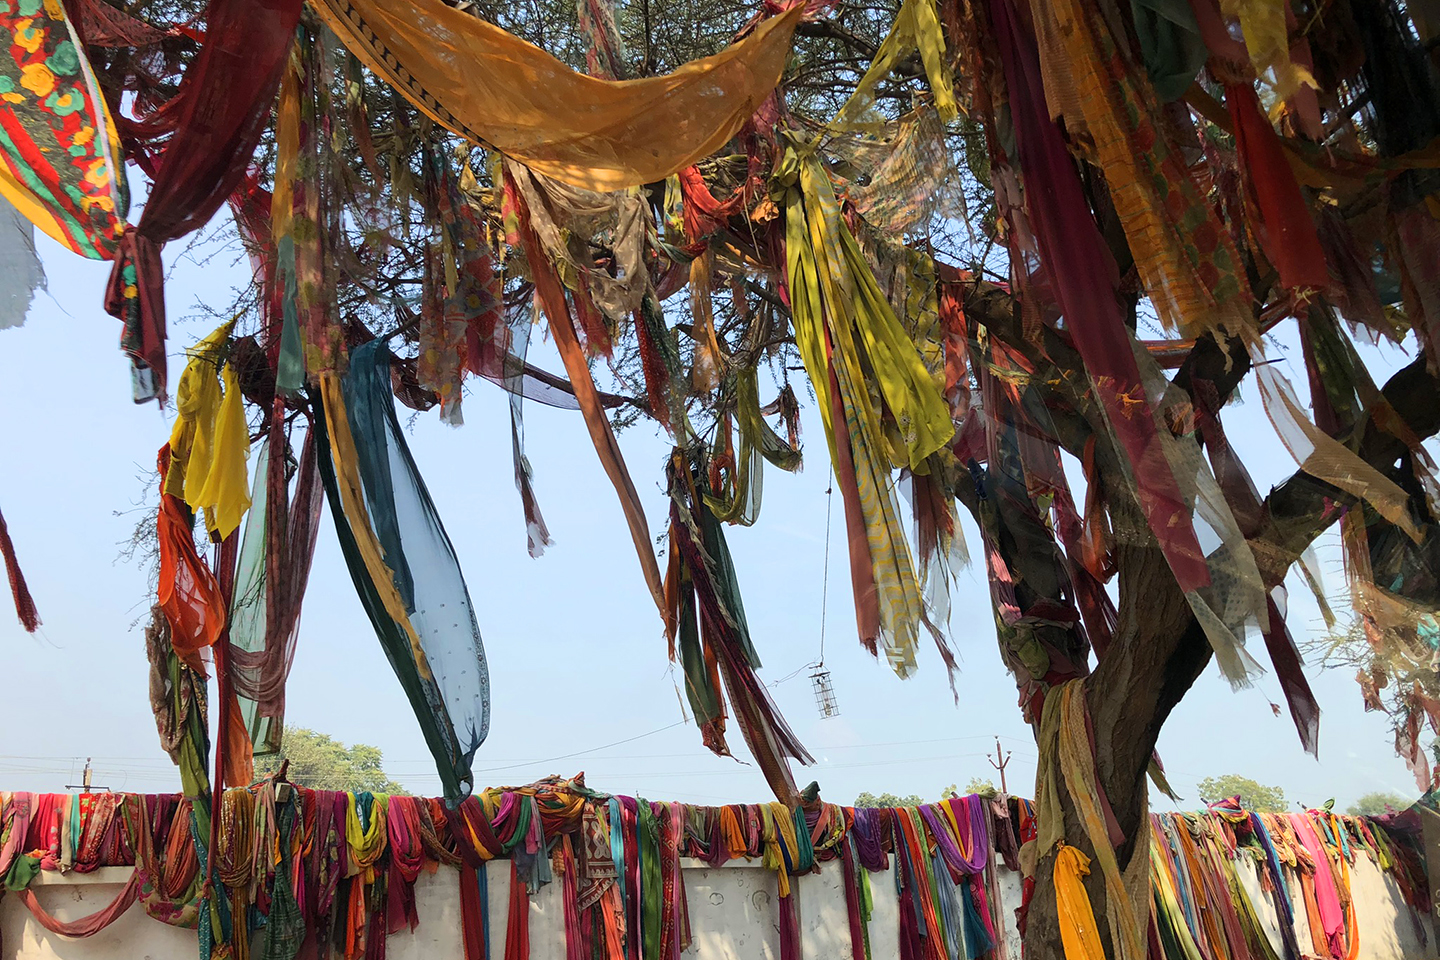 Many colorful cloths appear to be hanging from trees.